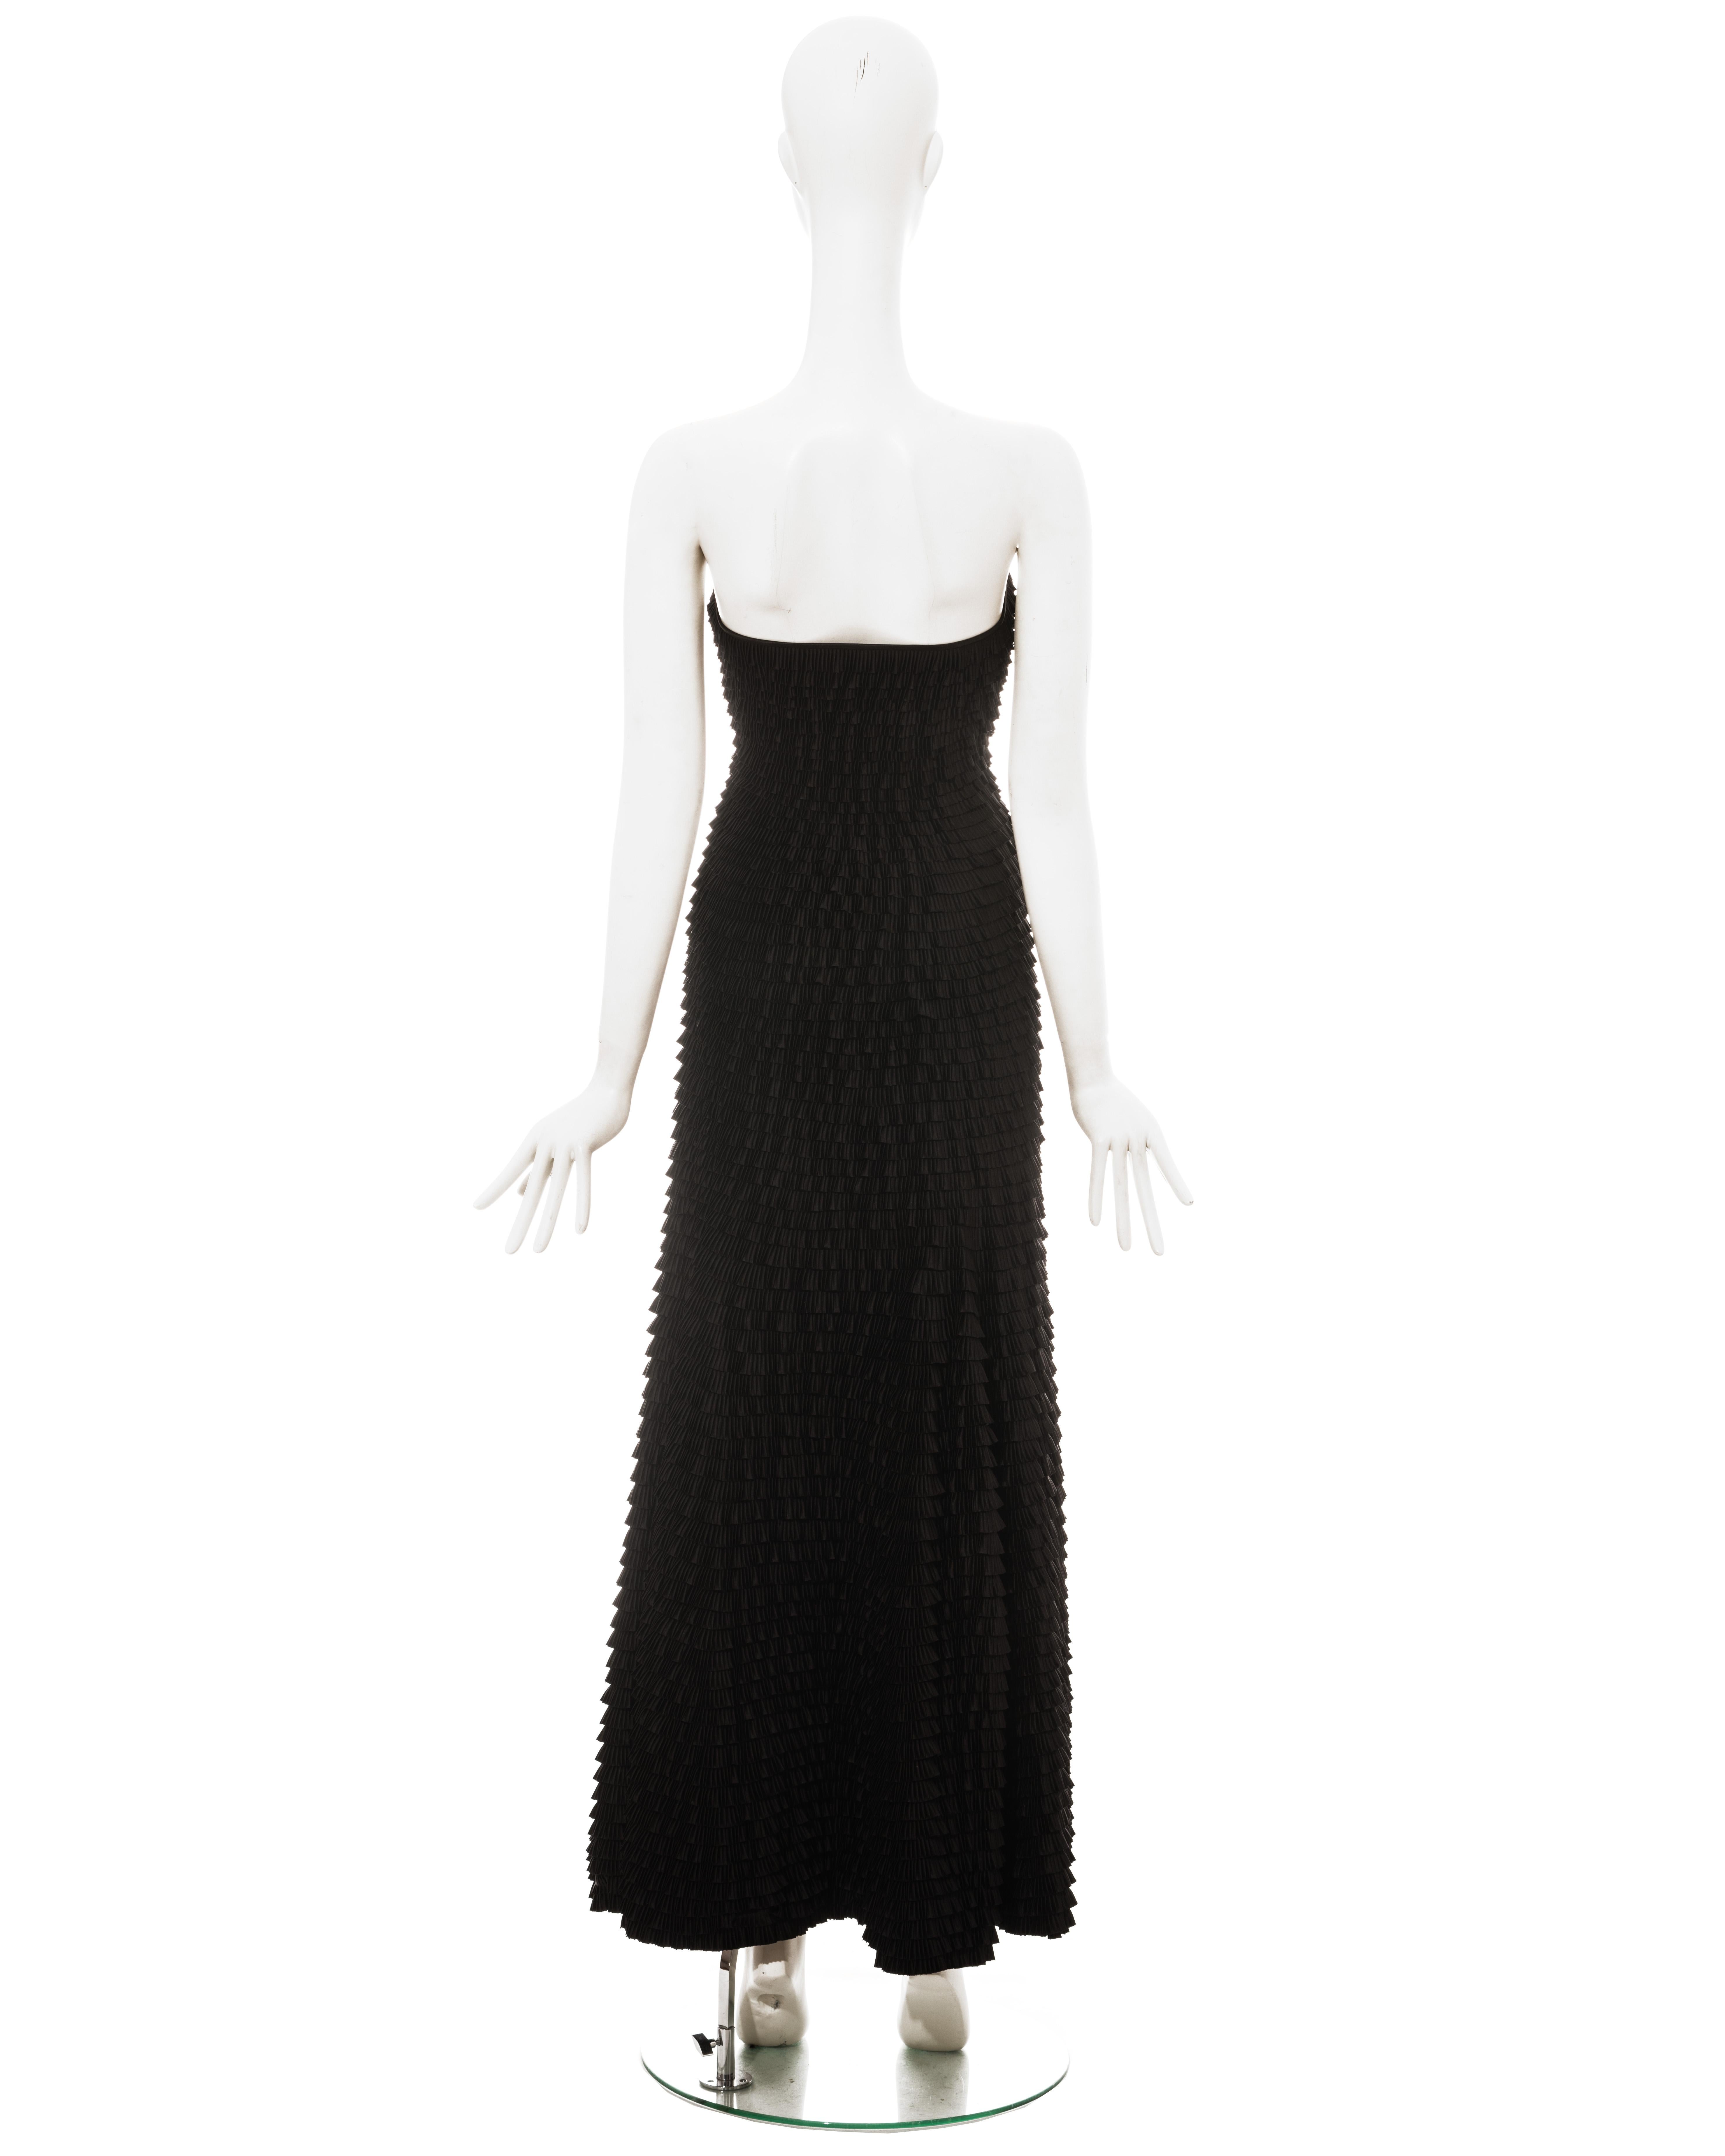 Givenchy by Alexander McQueen black ruffled fishtail evening dress, ss 1999 For Sale 2